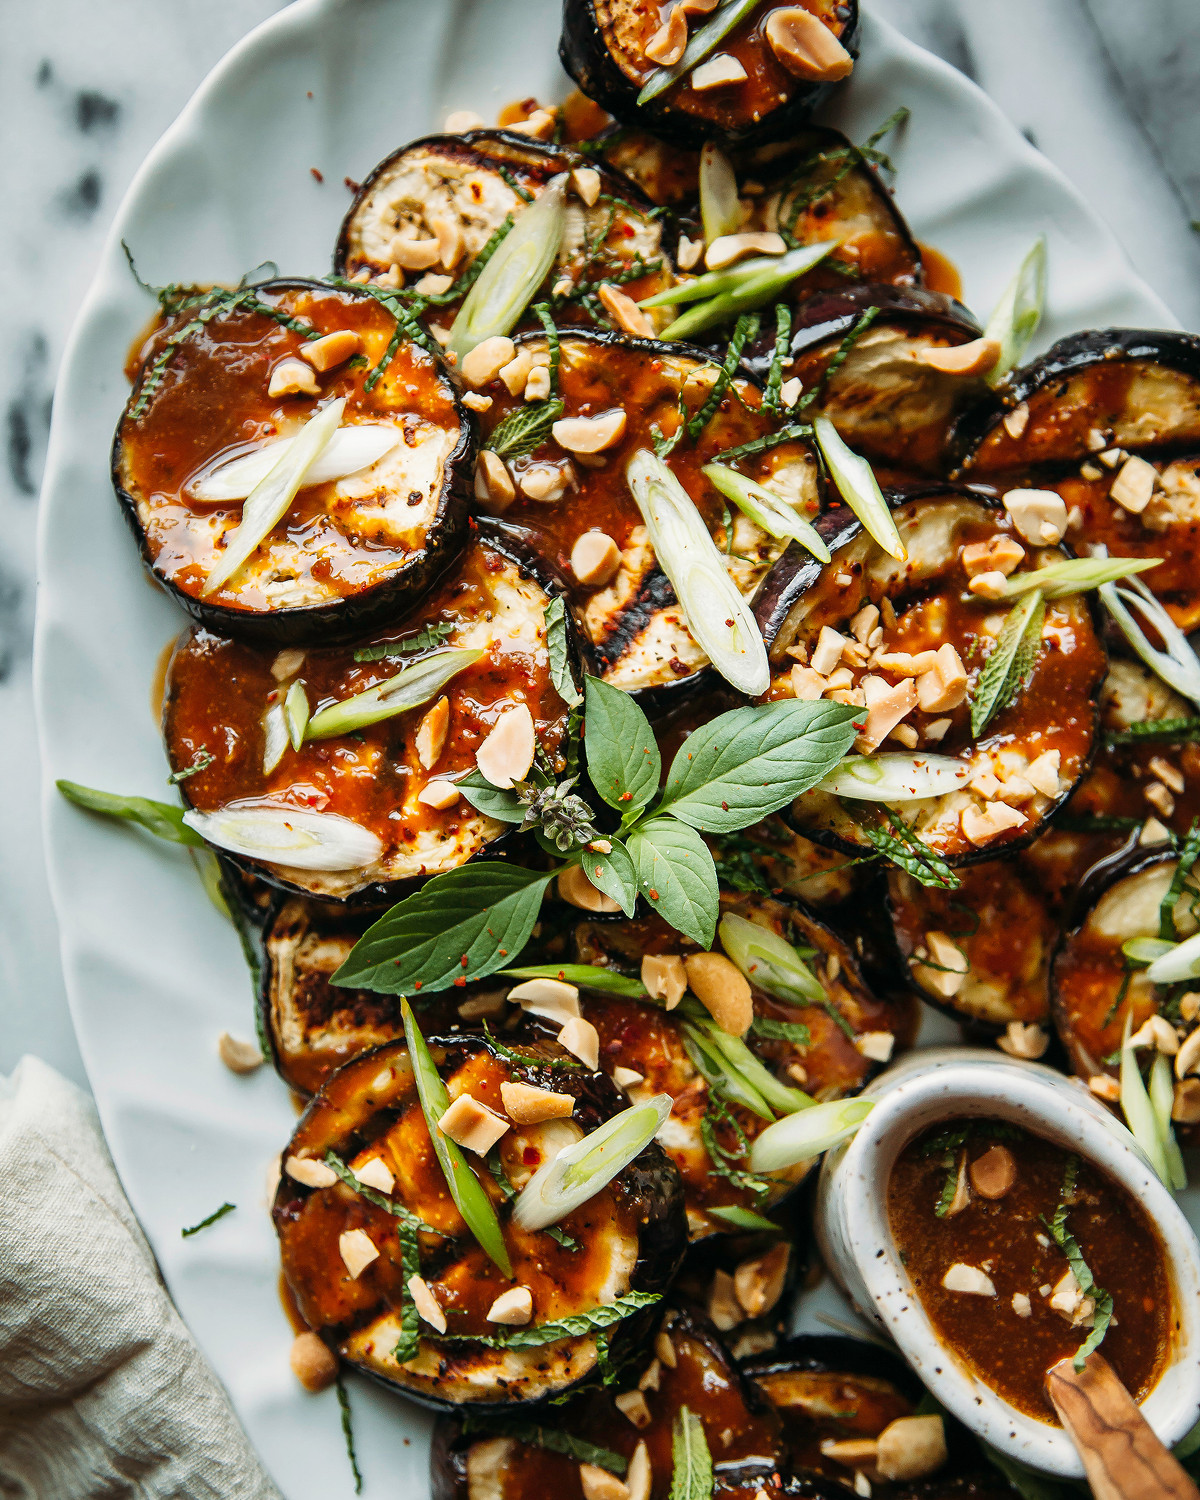 Eggplant Plant Based Recipes
 GRILLED EGGPLANT WITH PEANUT BUTTER TERIYAKI The First